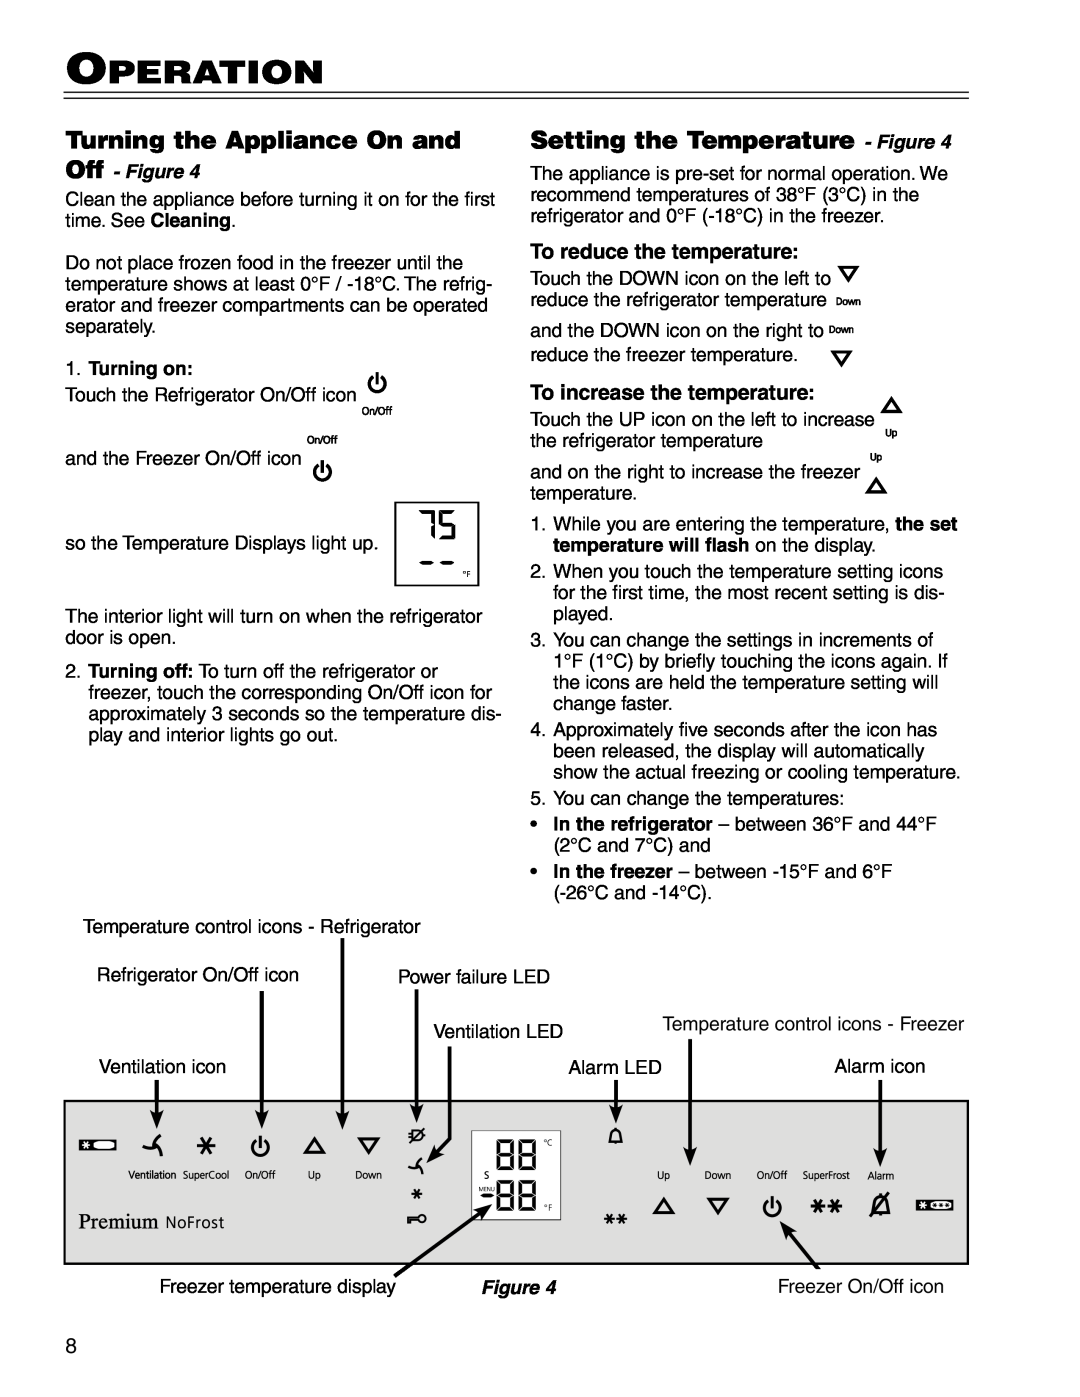 Liebherr CS 1400 7082 663-00 manual Operation, Turning the Appliance On and, Setting the Temperature - Figure, Off - Figure 